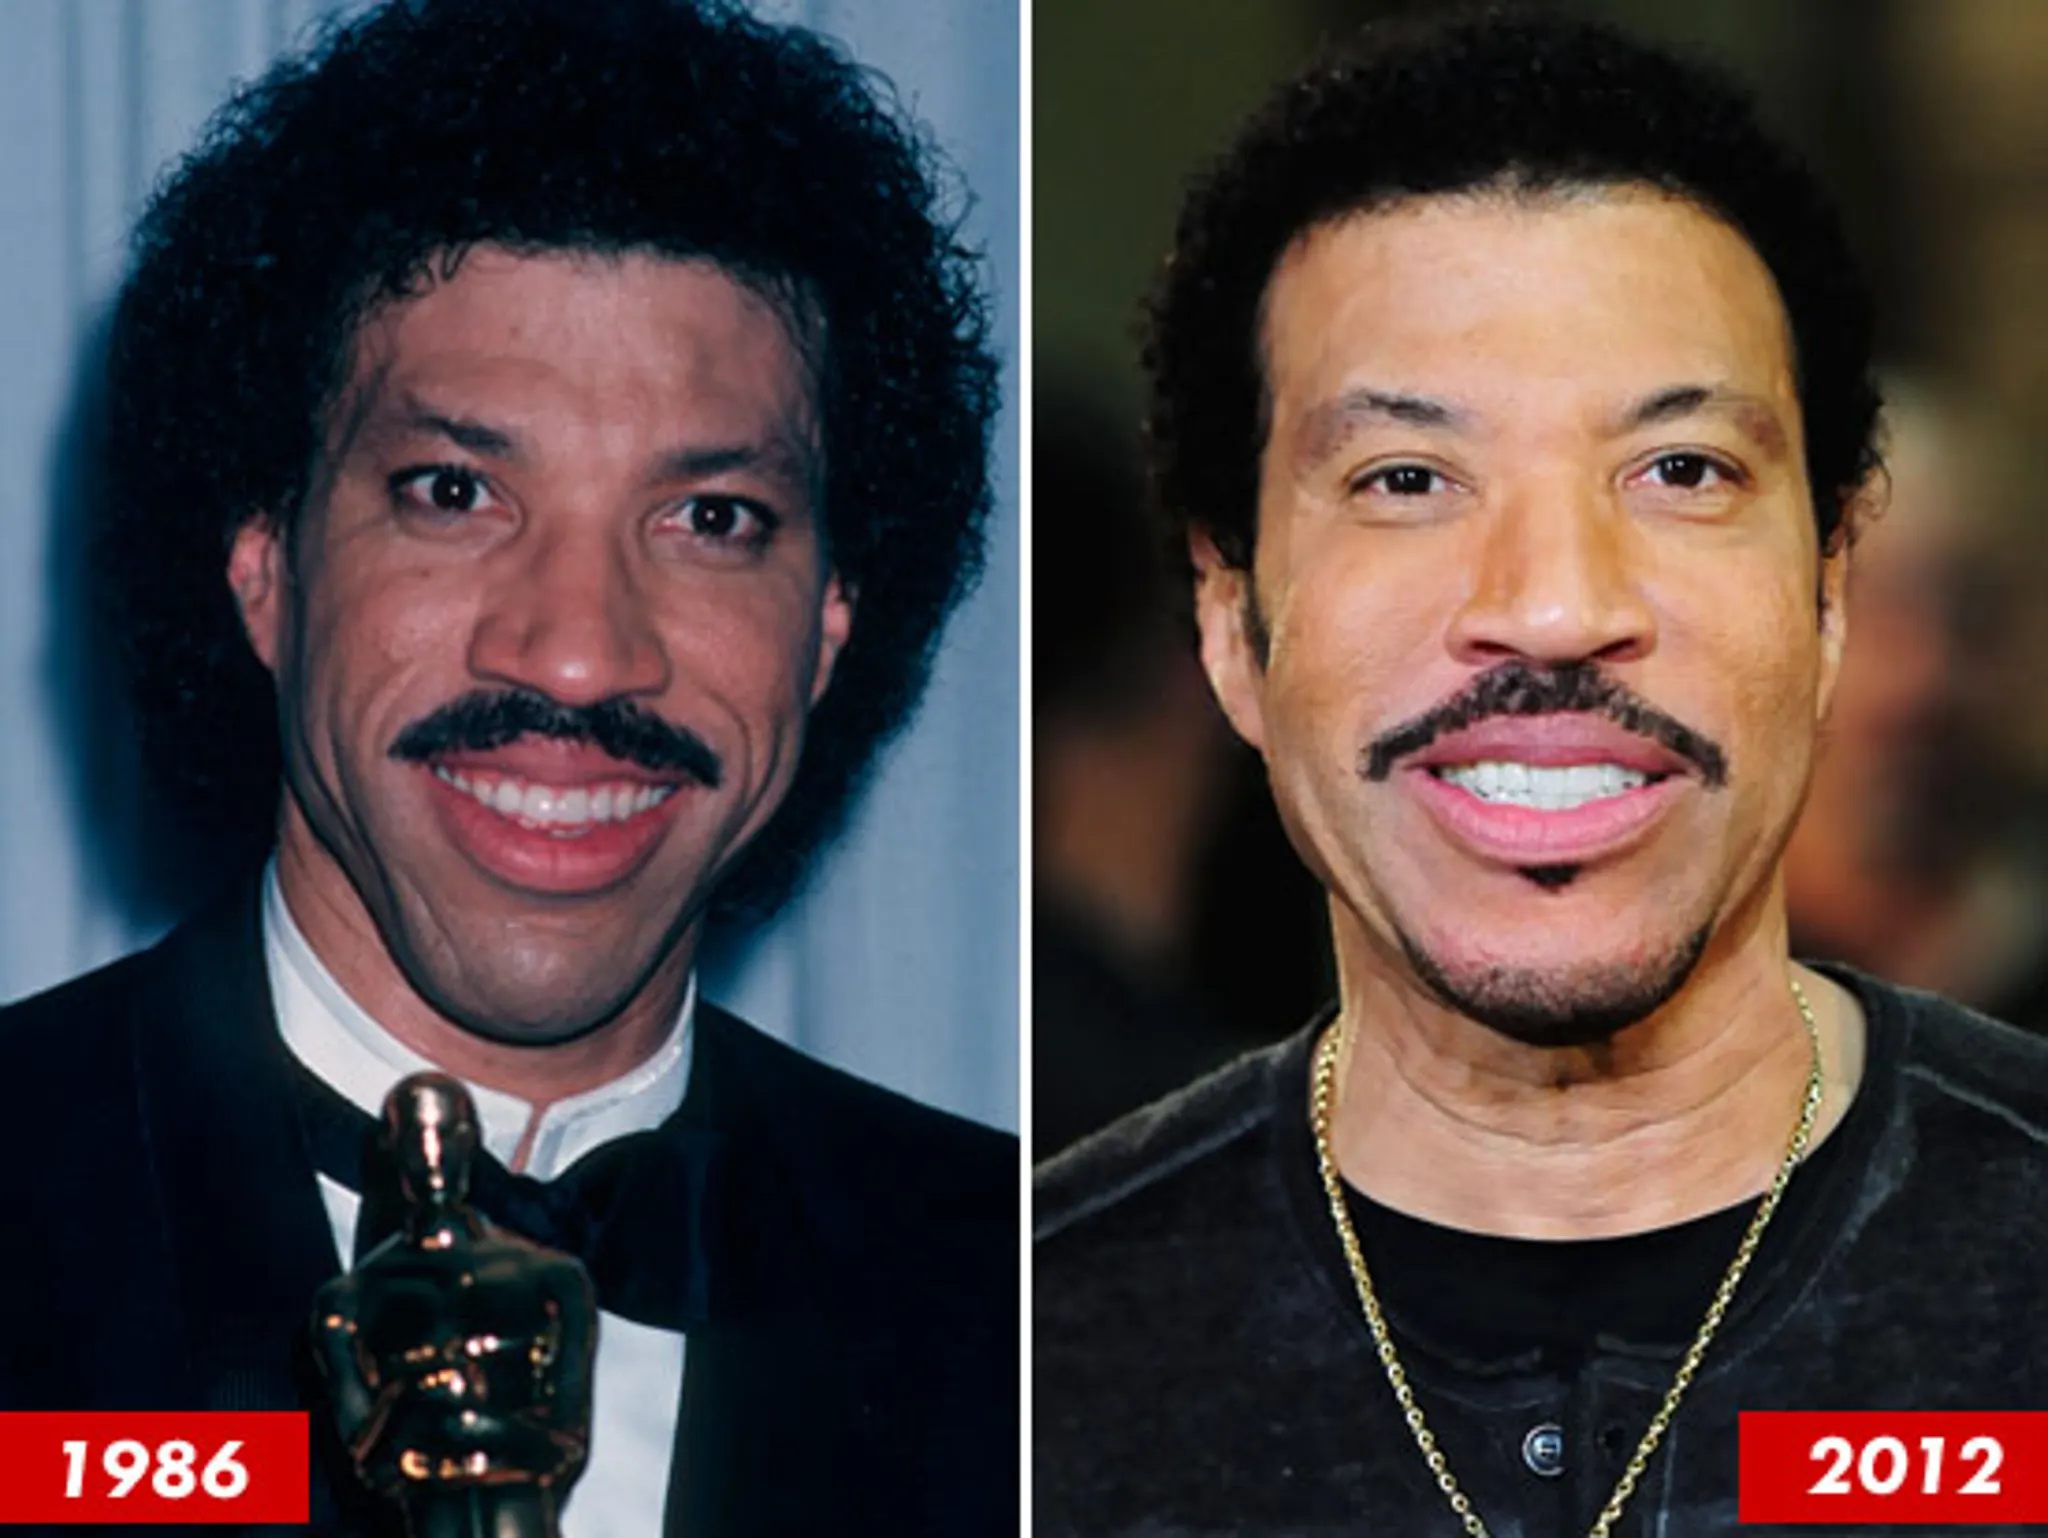 Lionel Richie before and after transformation (Credits: TMZ)